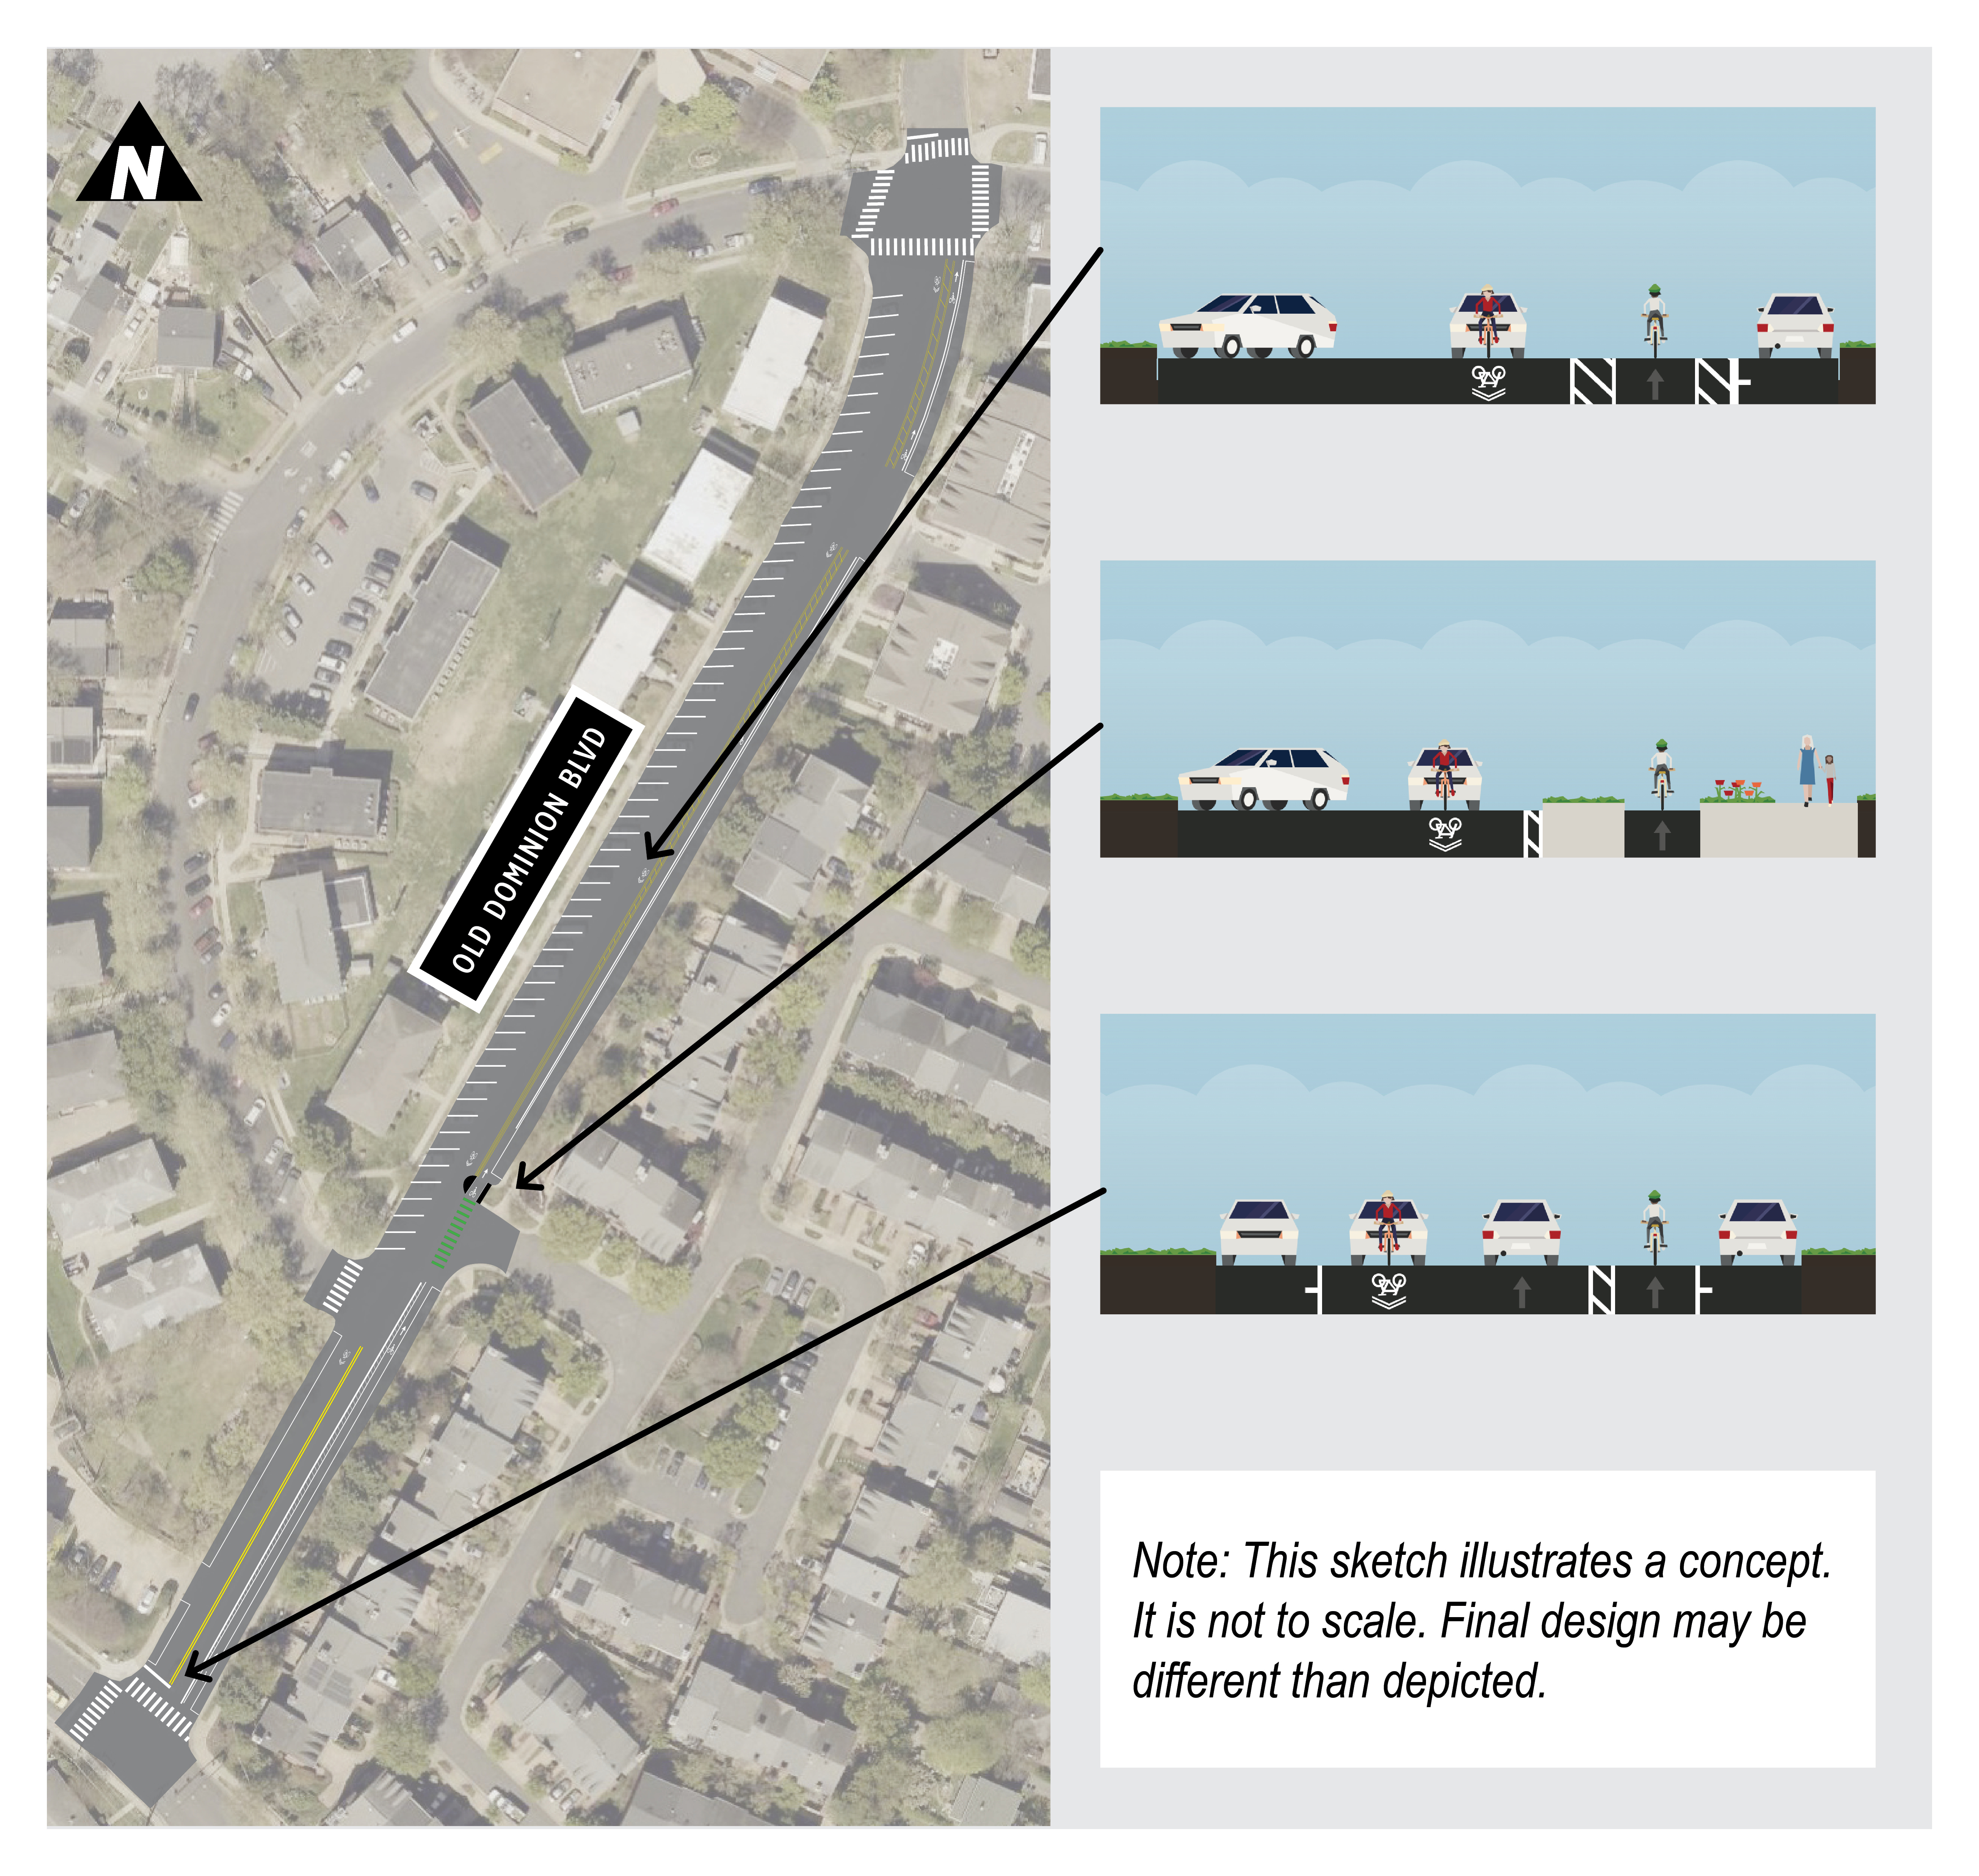 Graphic shows concept cross section for three locations along project corridor.